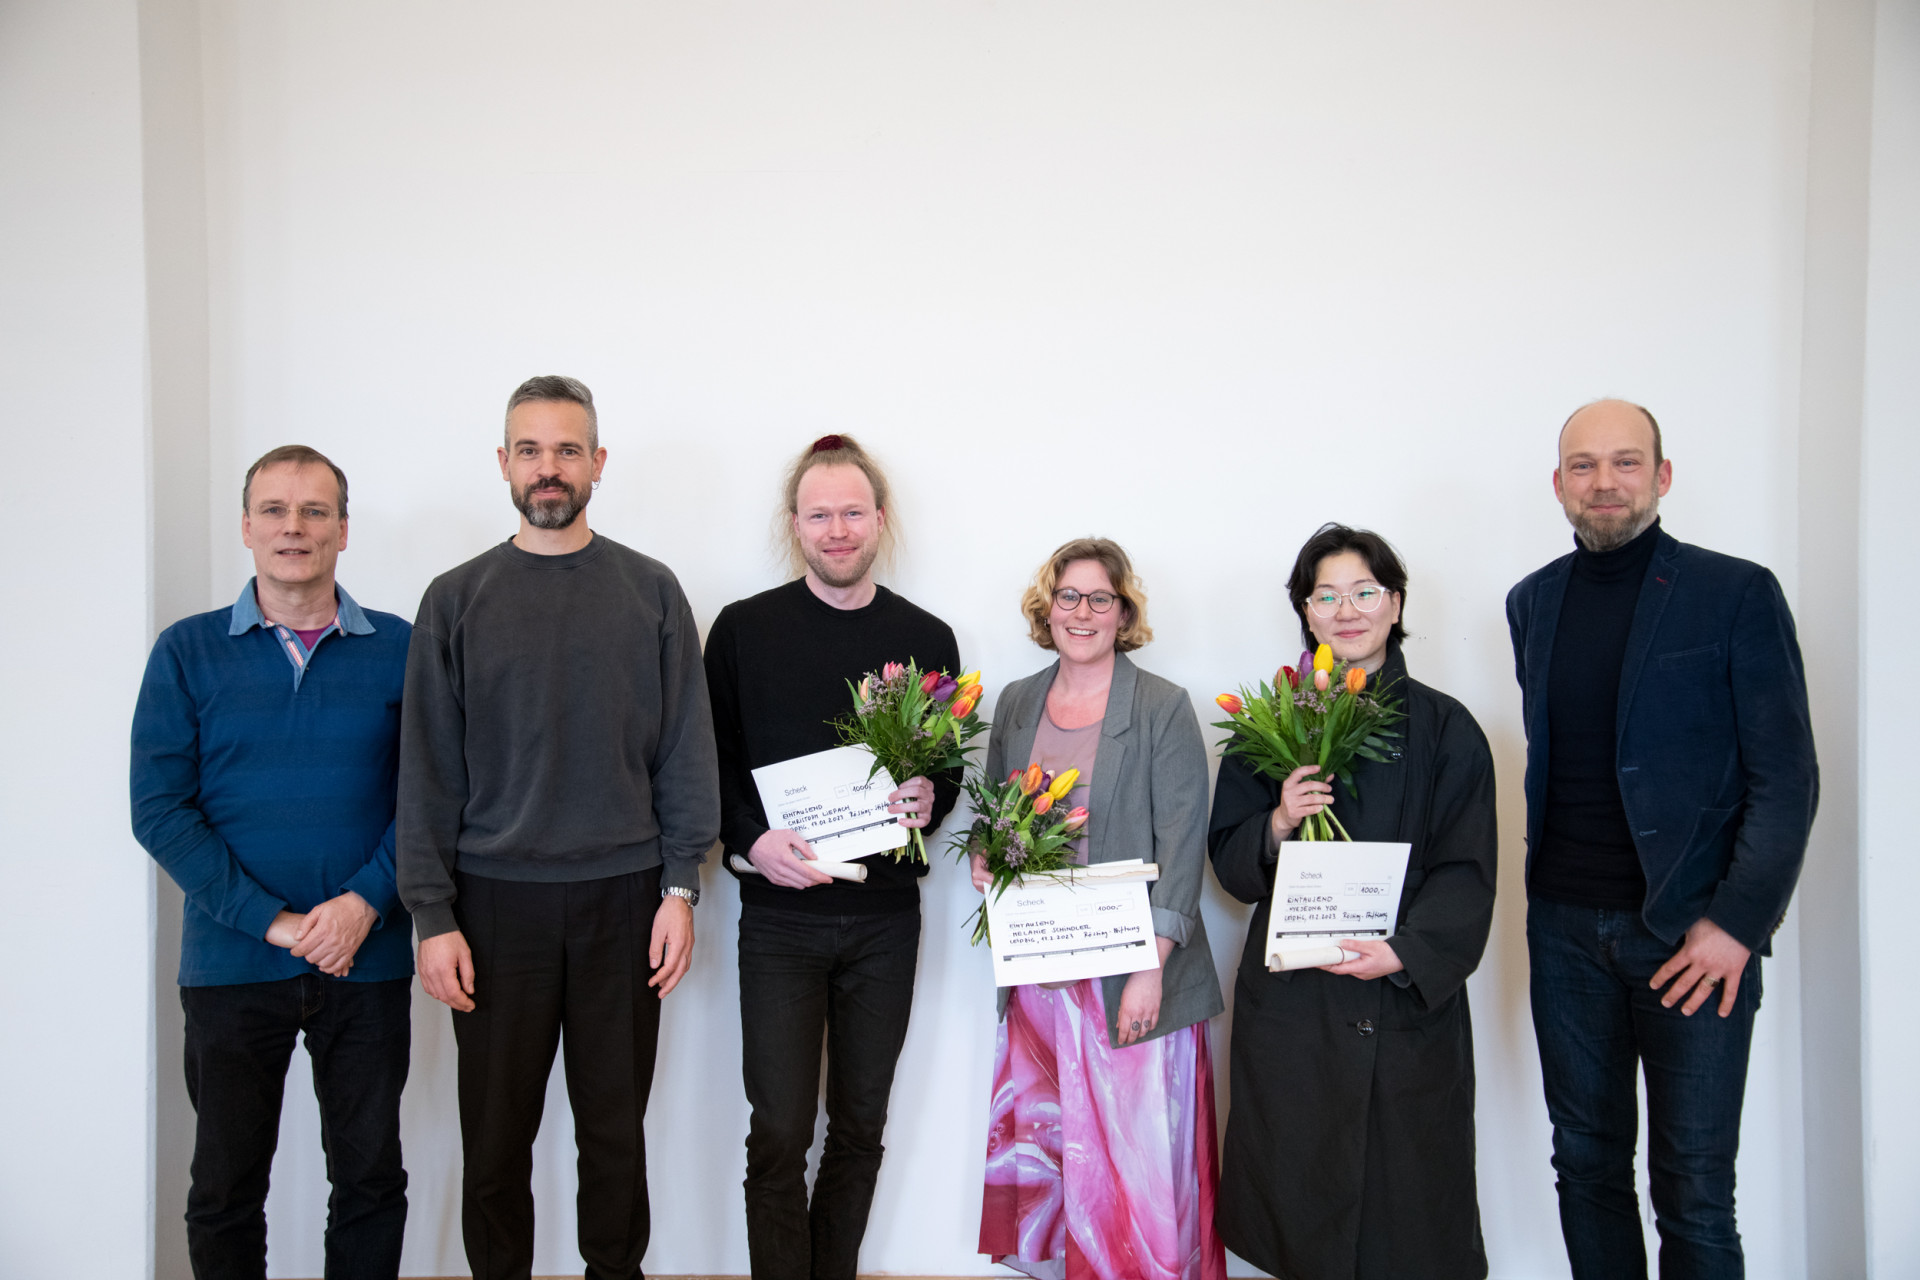 Christoph Liepach, Melanie Schindler and Hyejeong Yoo receive Rössing Prize for Photography 2022